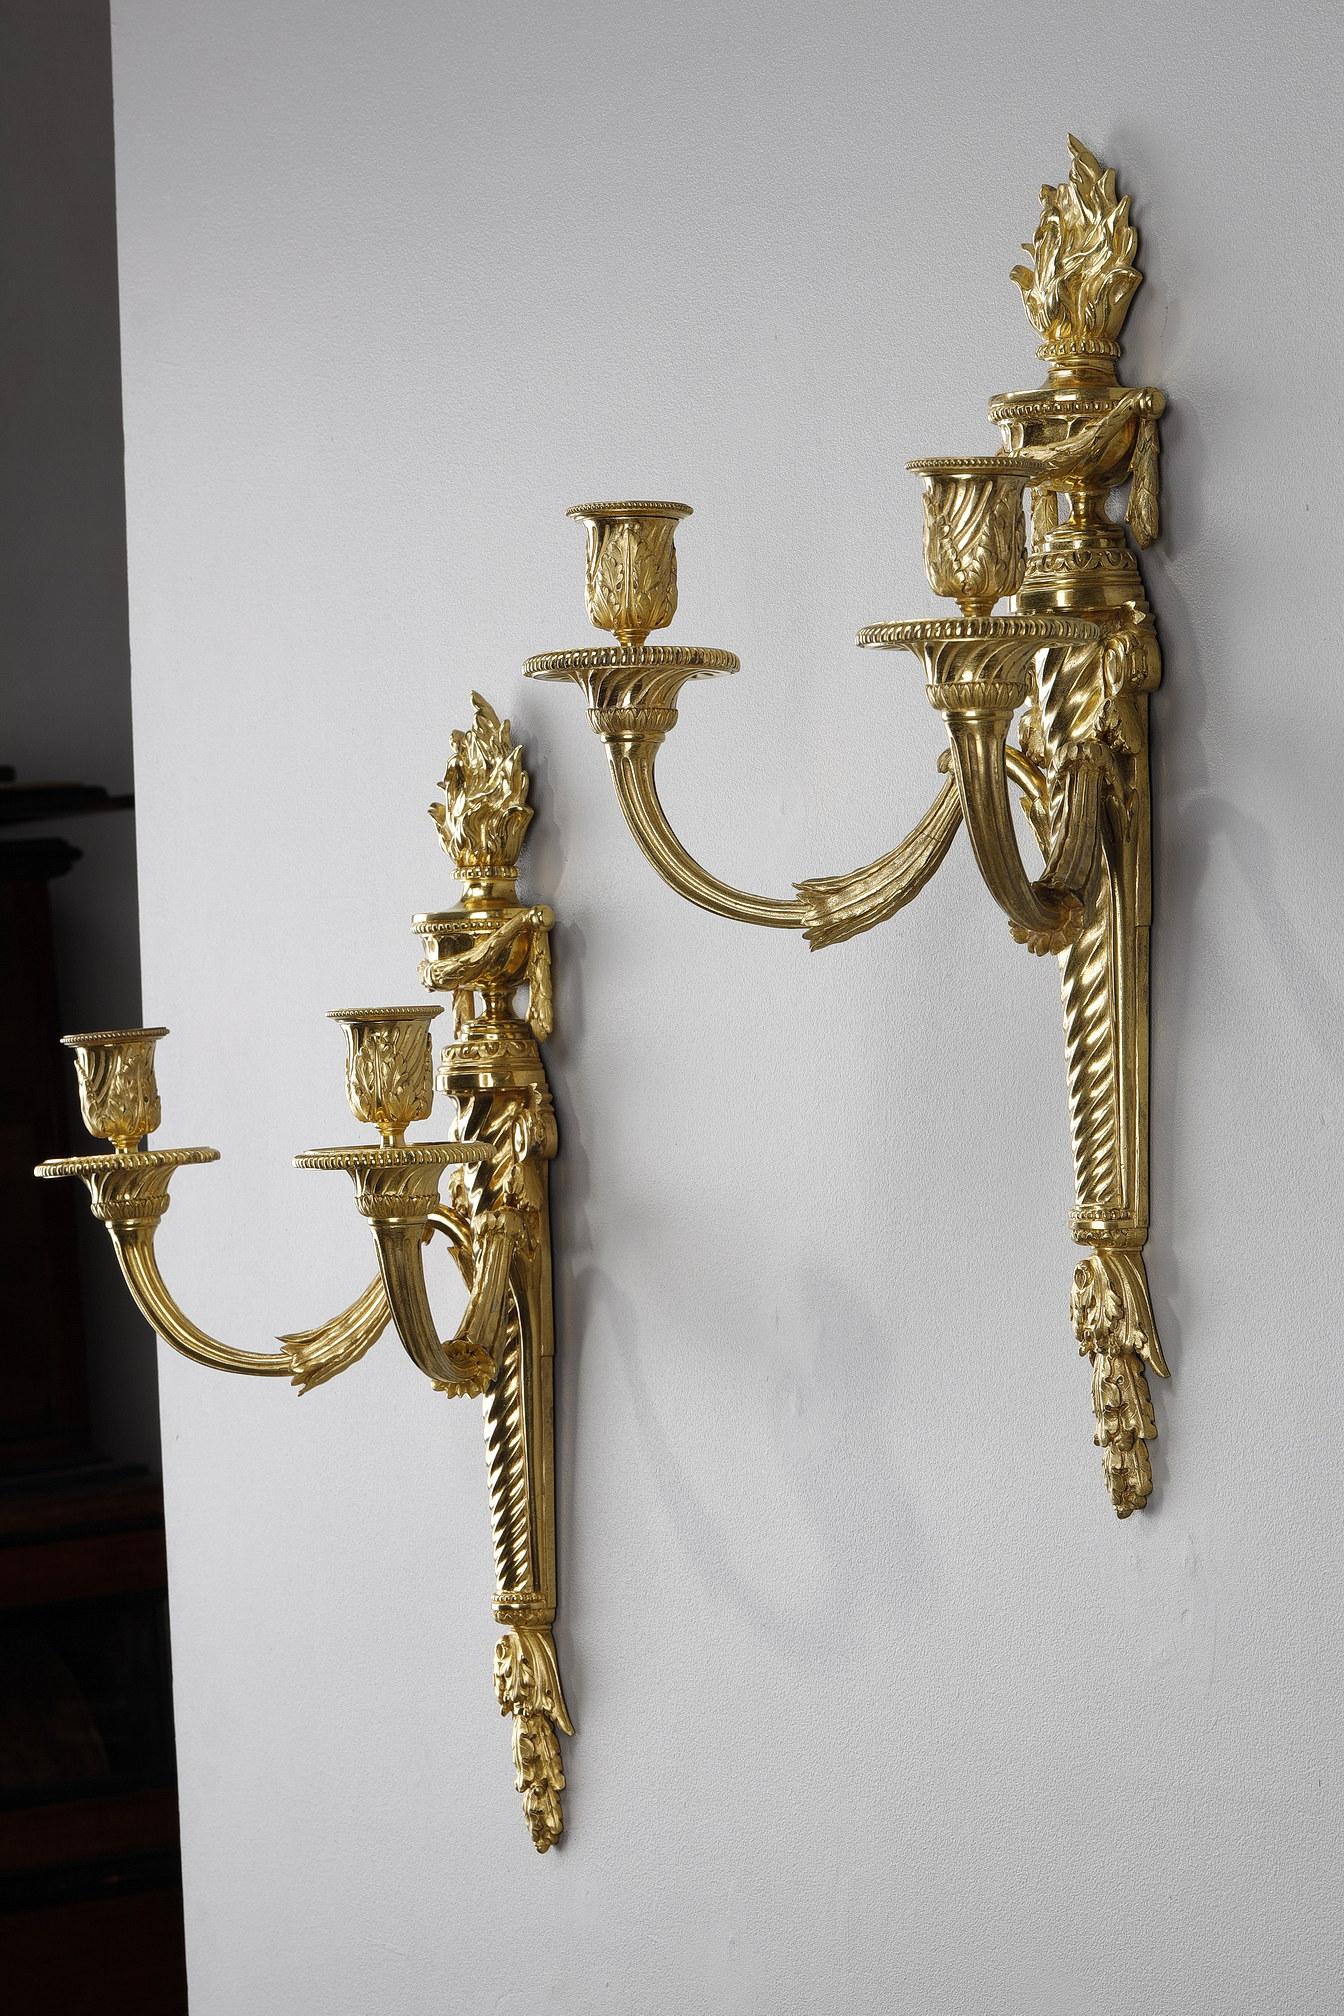 A pair of ormolu and chased sconces with two light arms. The twisted plate is decorated with foliage and volutes. It is surmounted by a fire pot decorated with garlands of laurels. The two fluted light arms end with pearl motif bobeches and acanthus